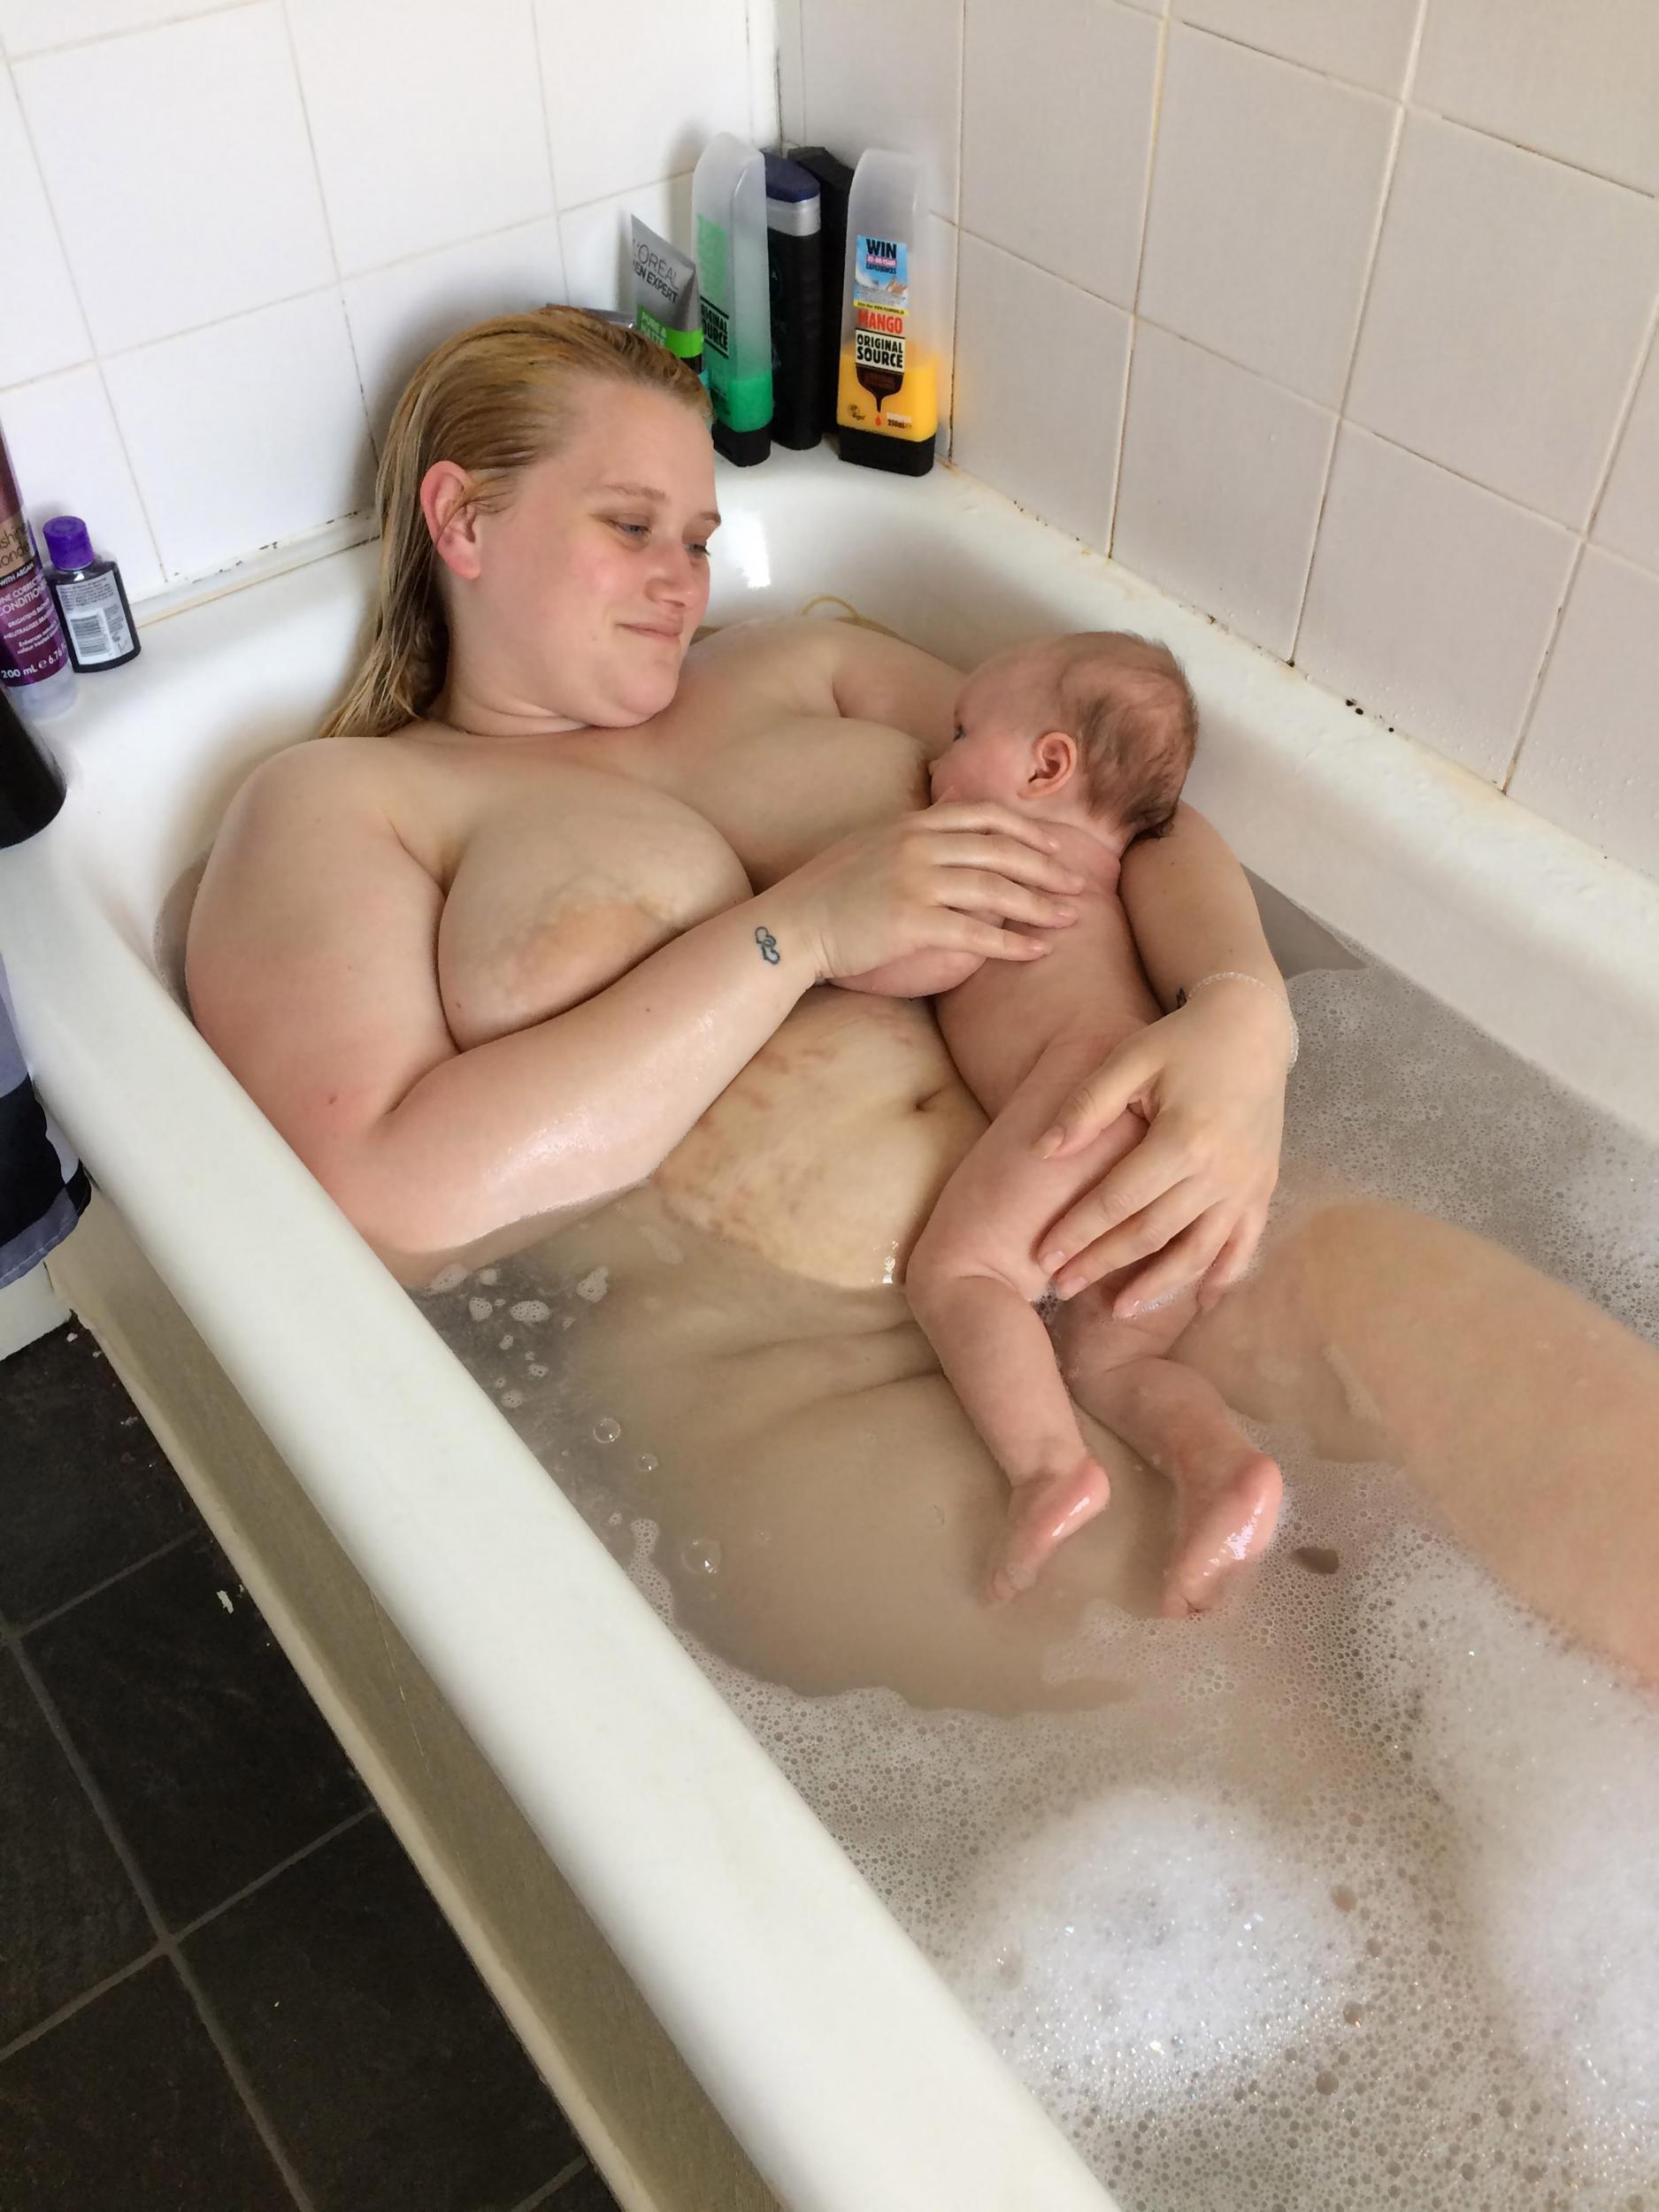 Woman posts naked breastfeeding photo to remind mothers ...